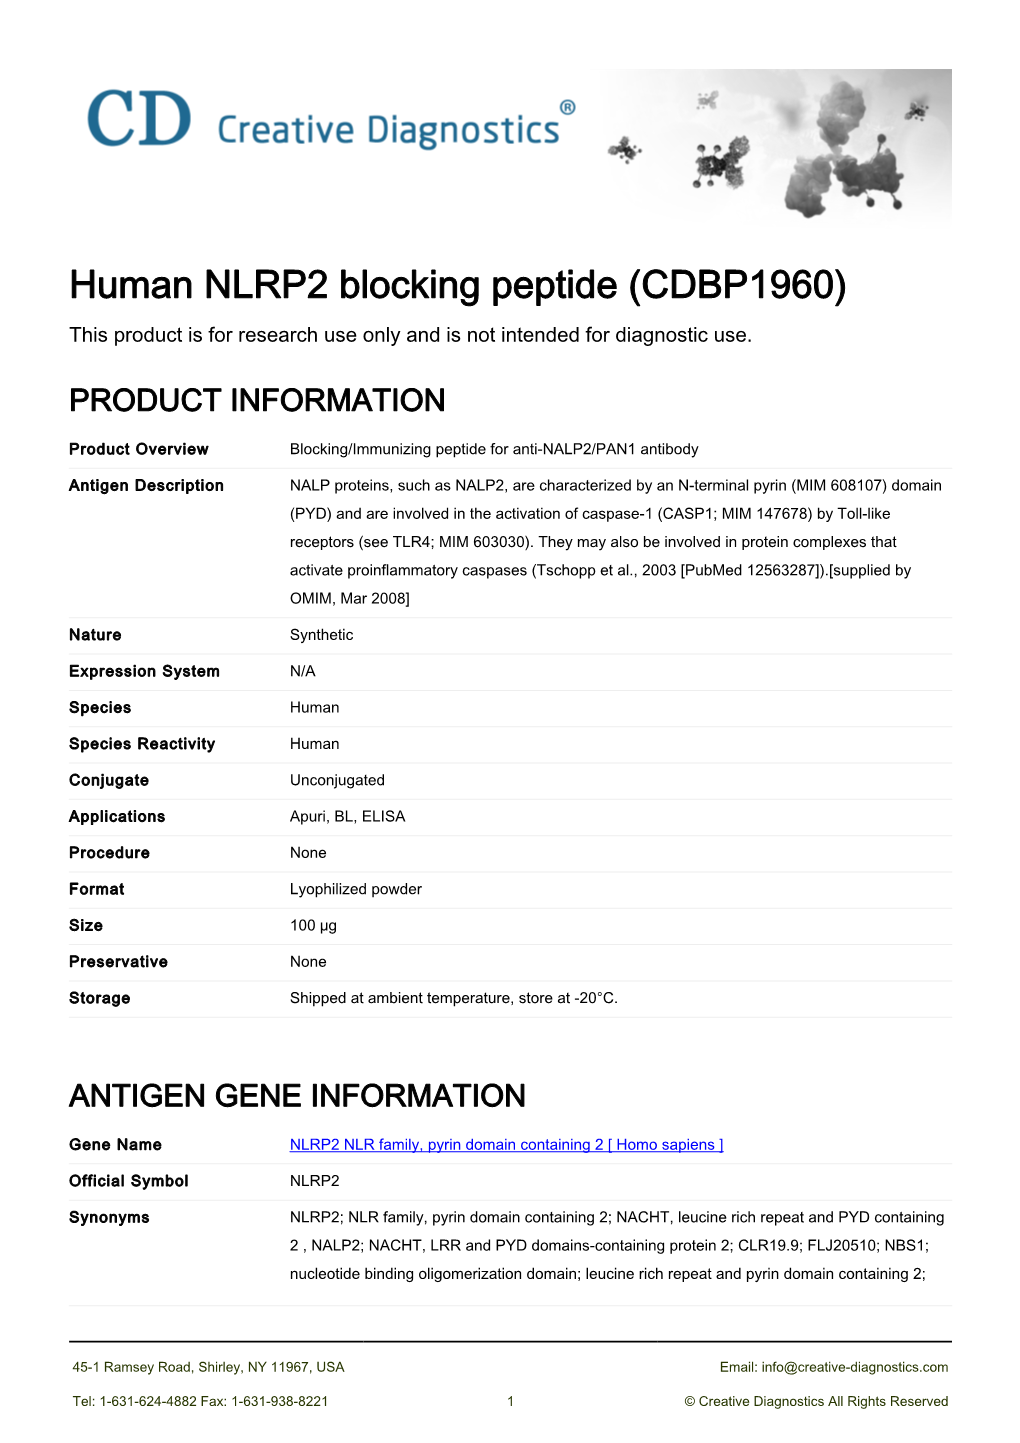 Human NLRP2 Blocking Peptide (CDBP1960) This Product Is for Research Use Only and Is Not Intended for Diagnostic Use